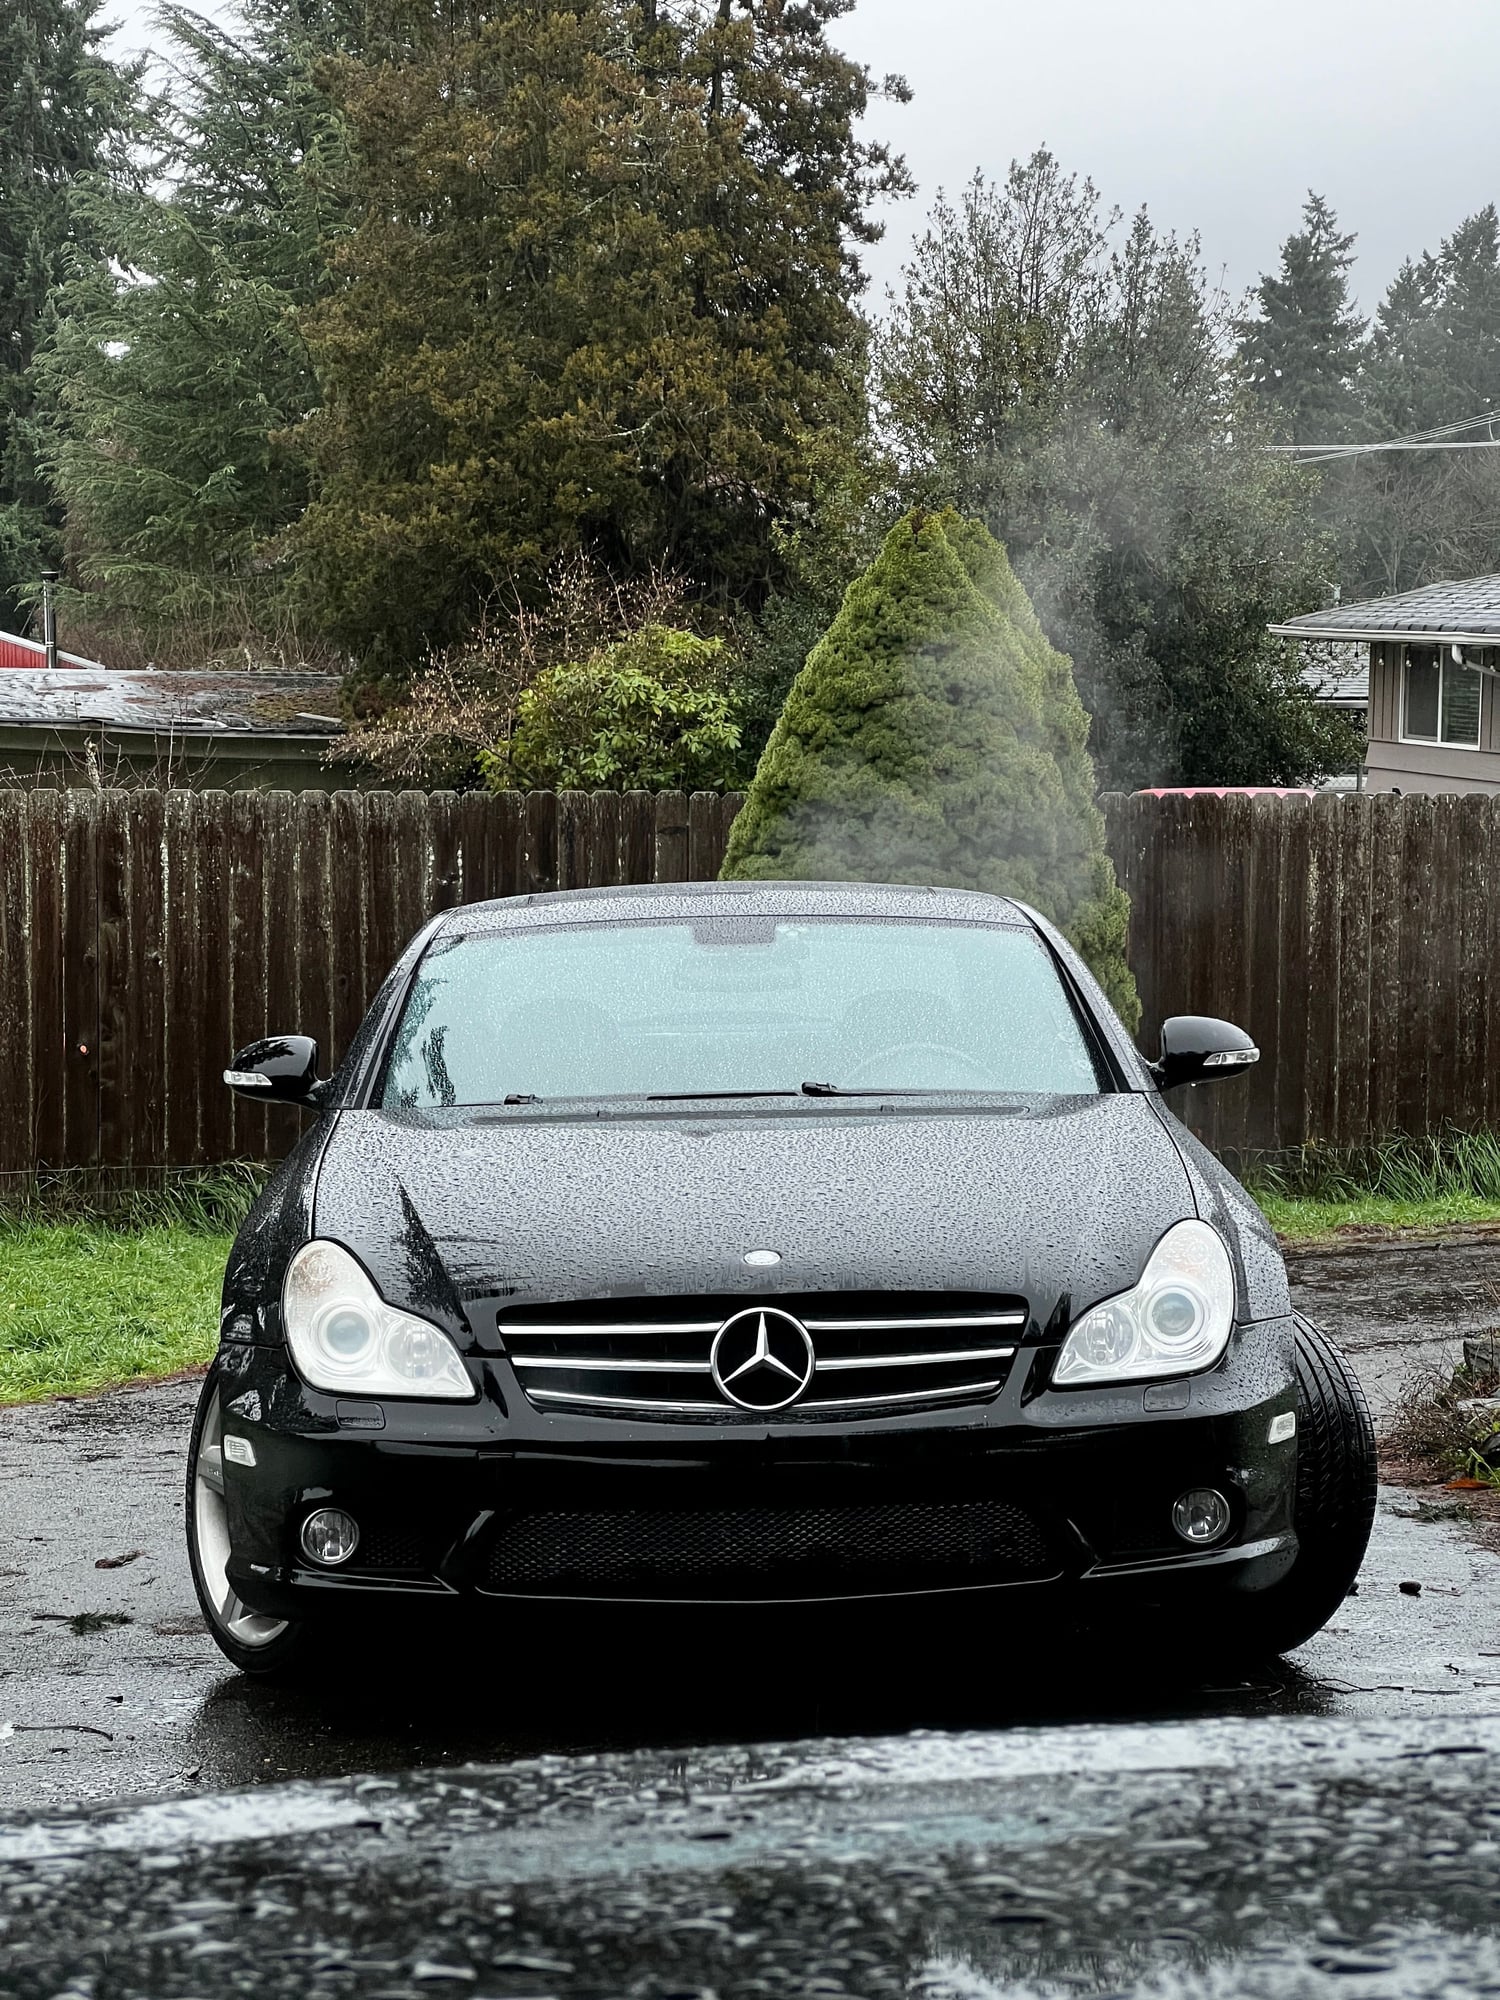 2006 Mercedes-Benz CLS55 AMG - CLS55 For Sale - Used - VIN WDDDJ76X66A040118 - 120,400 Miles - 8 cyl - 2WD - Automatic - Sedan - Black - Puyallup, WA 98373, United States